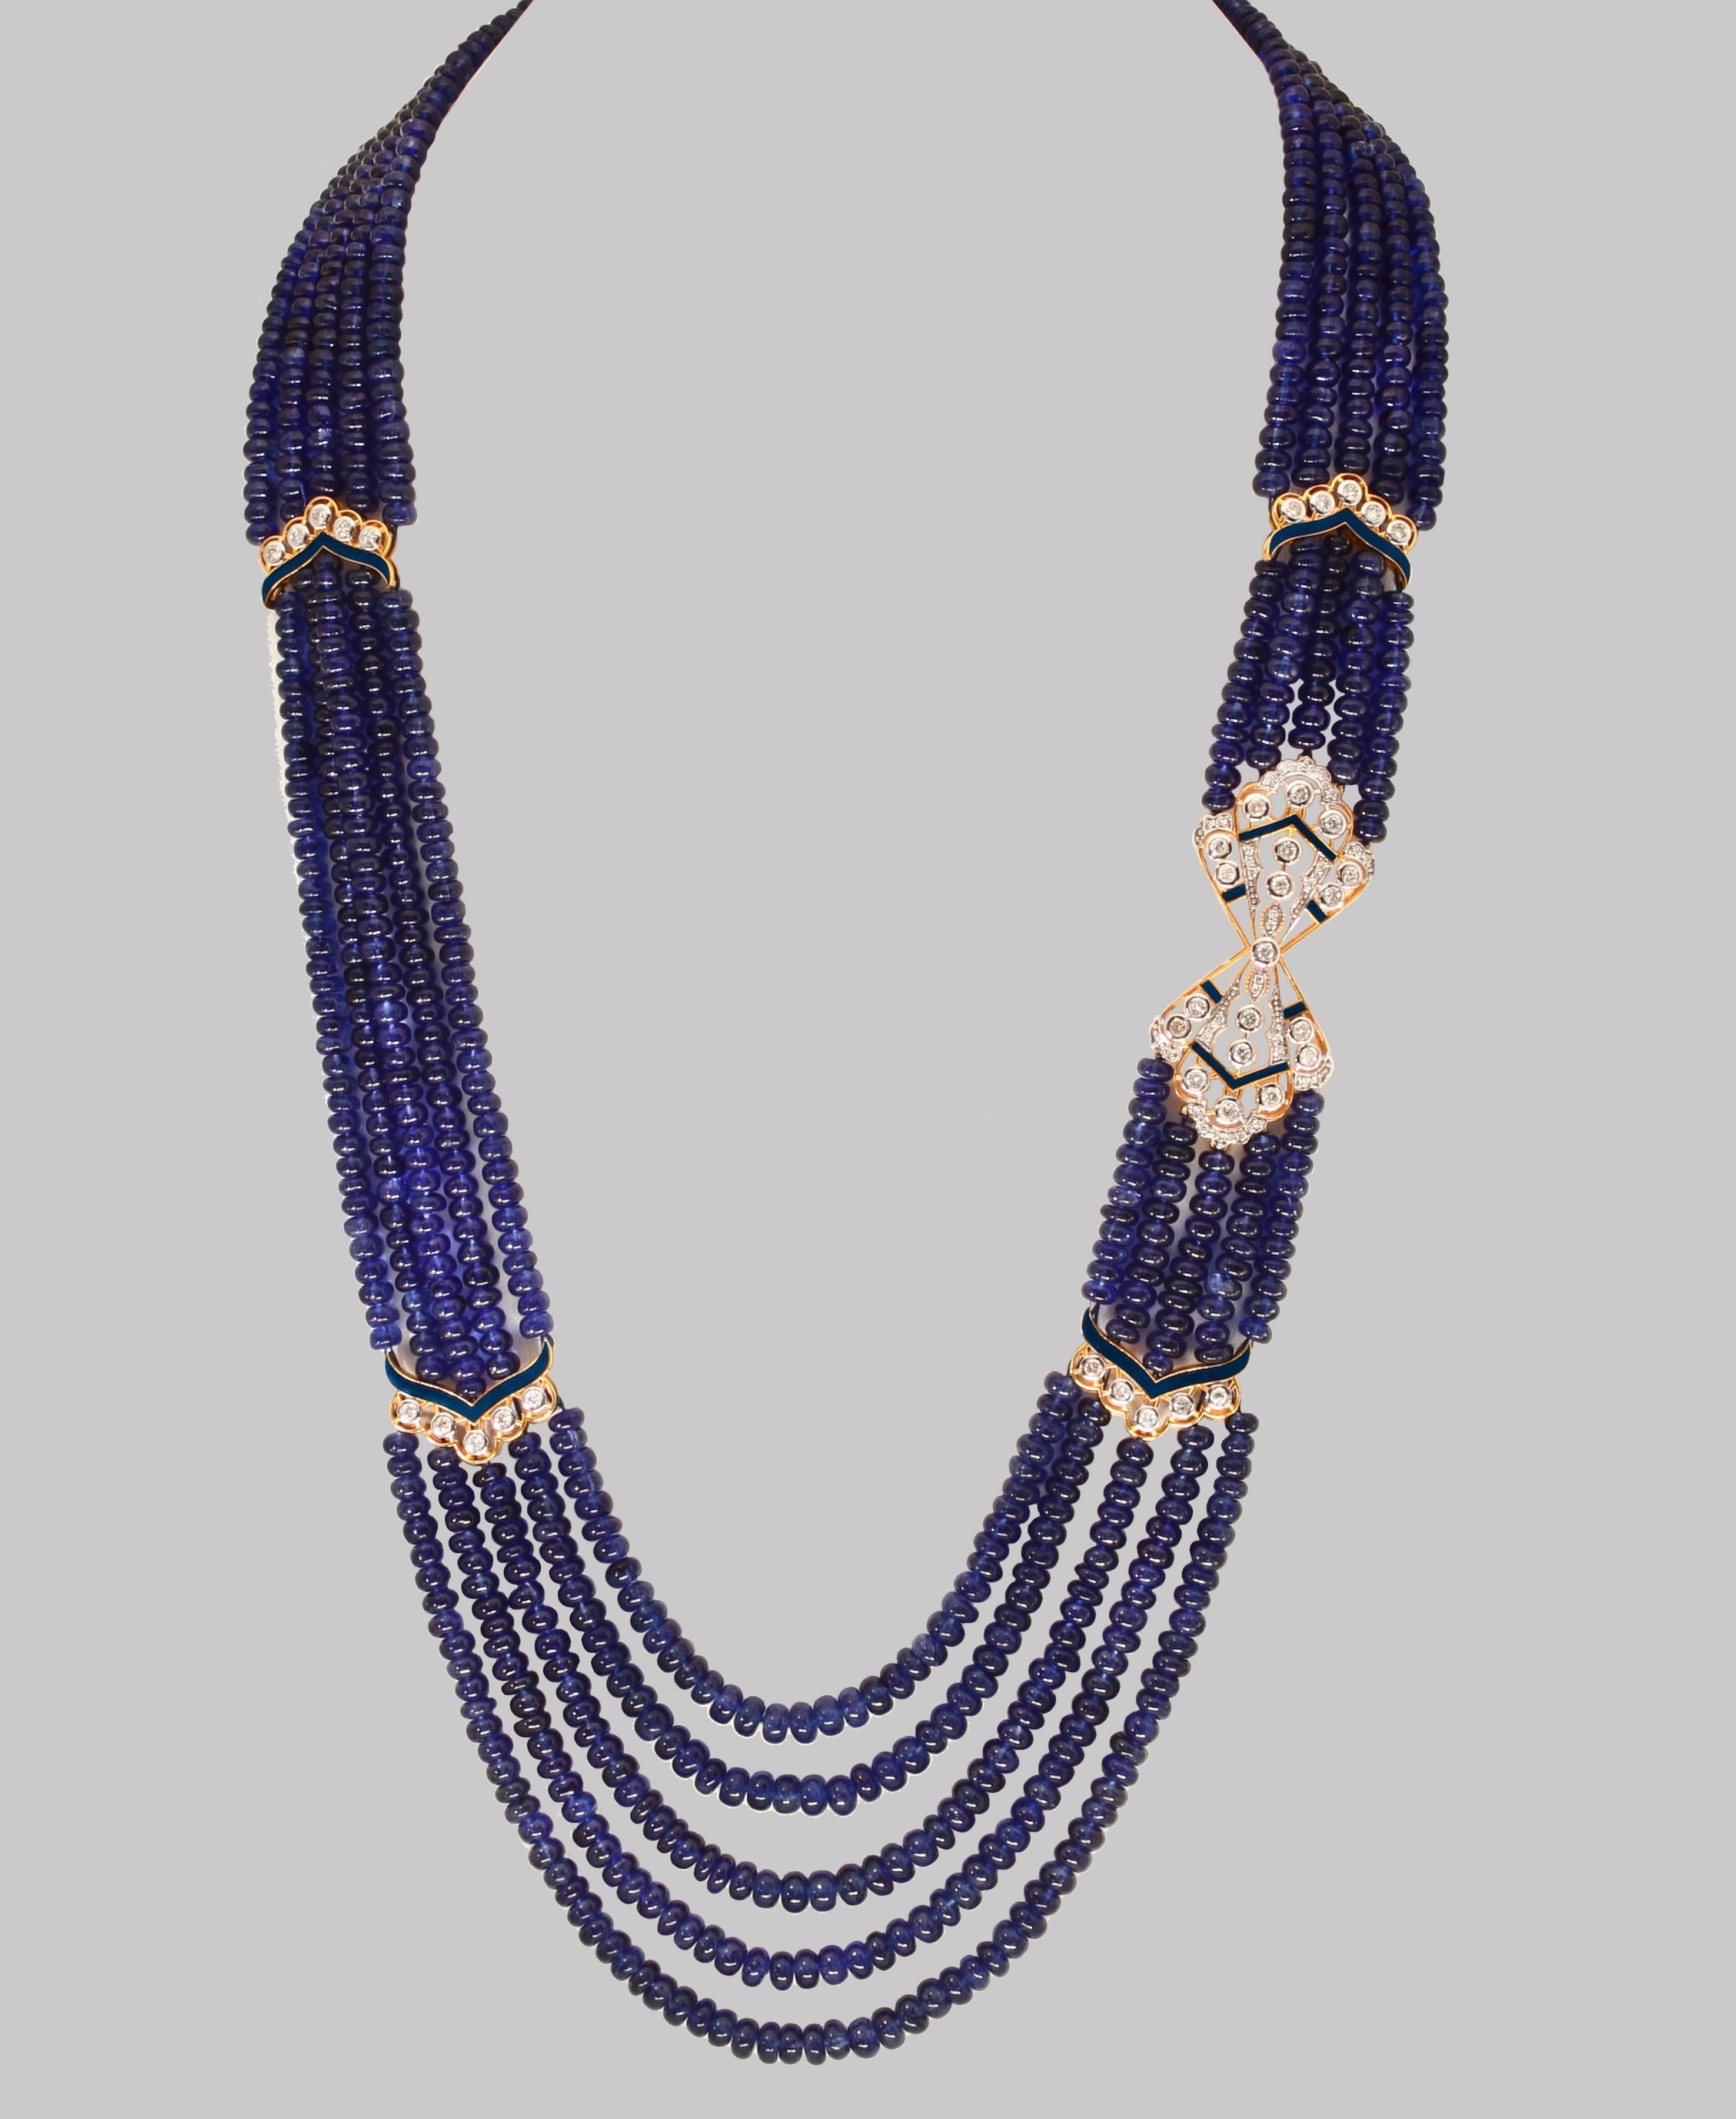 Smooth 1000 Ct Natural Tanzanite Bead Five Strand Necklace With Diamond 14 Karat Yellow  Gold
All natural beads , no color enhancement
Opera Length
Gold clasp is such that you can adjust the length of the necklace  
5 layers of Natural  Beads
These